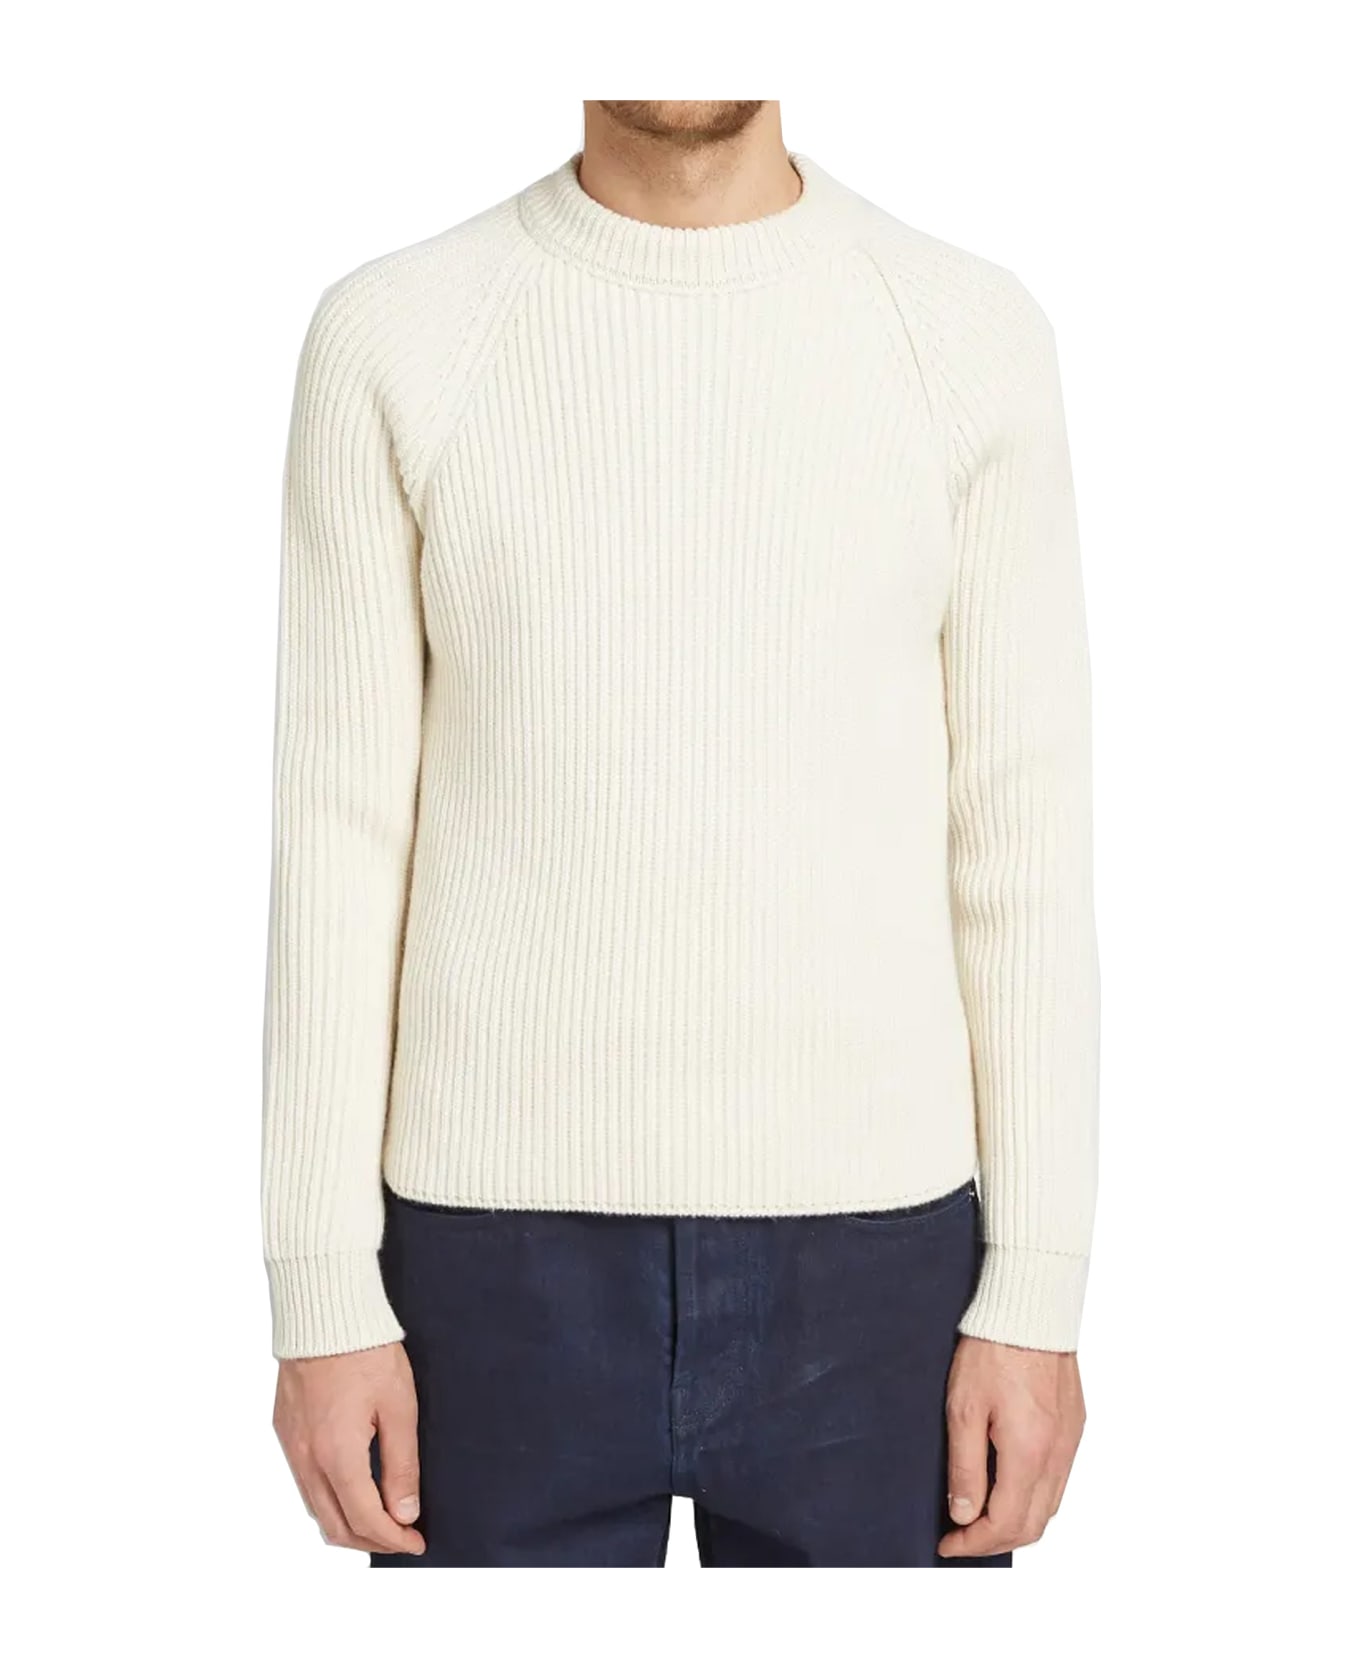 Saint Laurent Wool And Cashmere Sweater - White